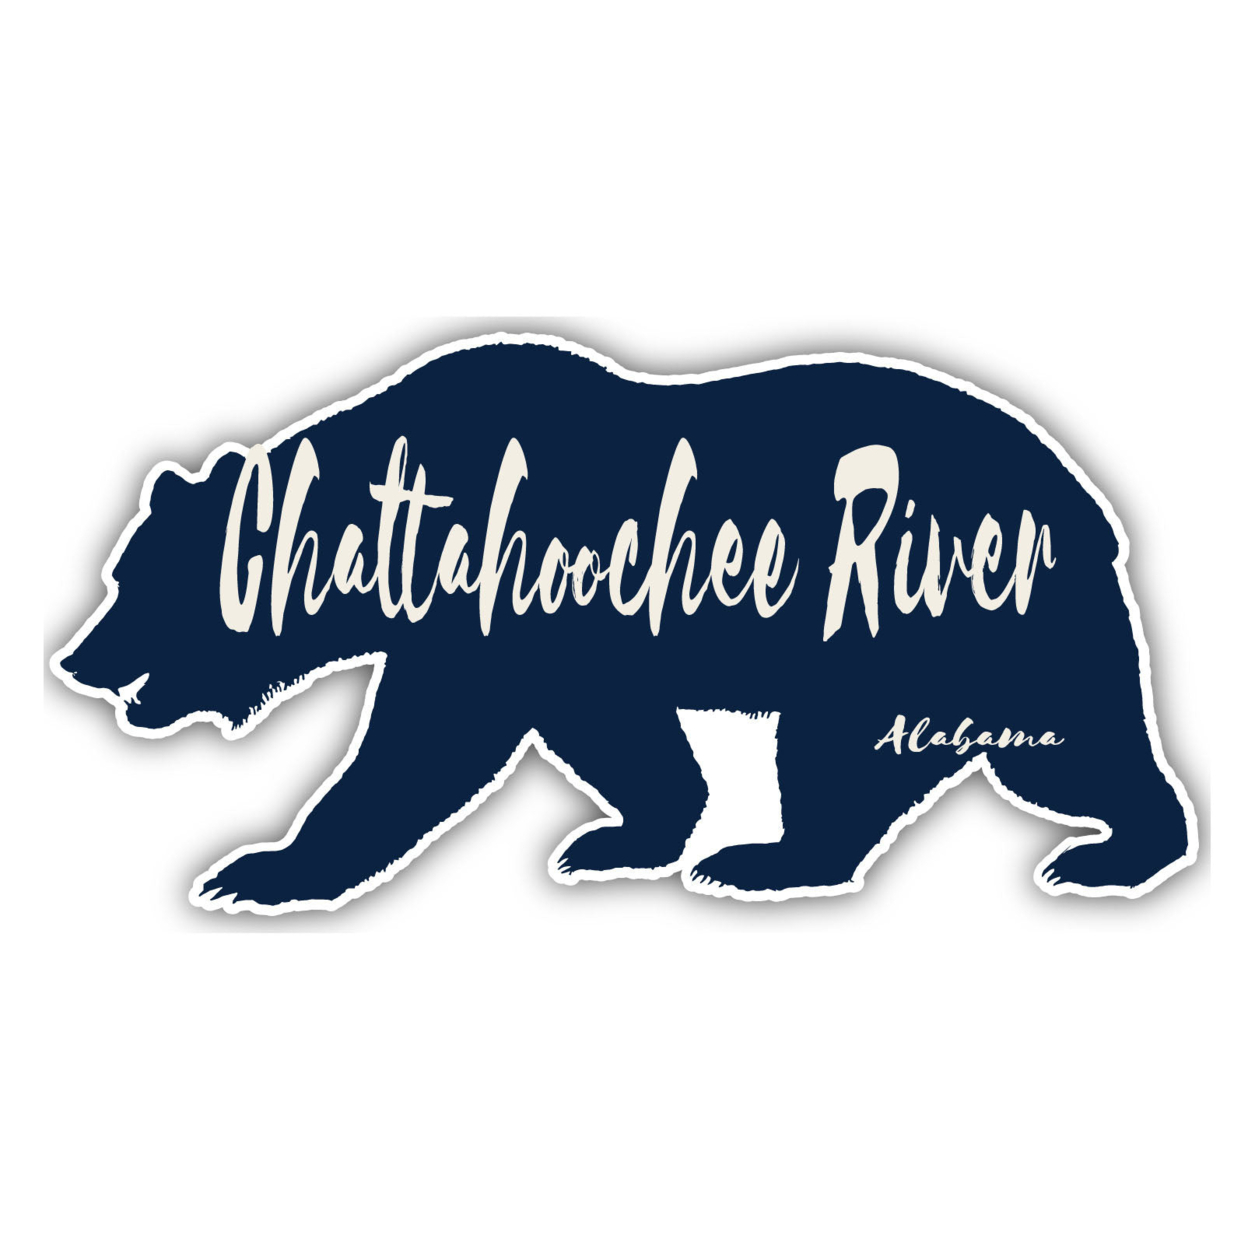 Chattahoochee River Alabama Souvenir Decorative Stickers (Choose Theme And Size) - 4-Pack, 6-Inch, Bear